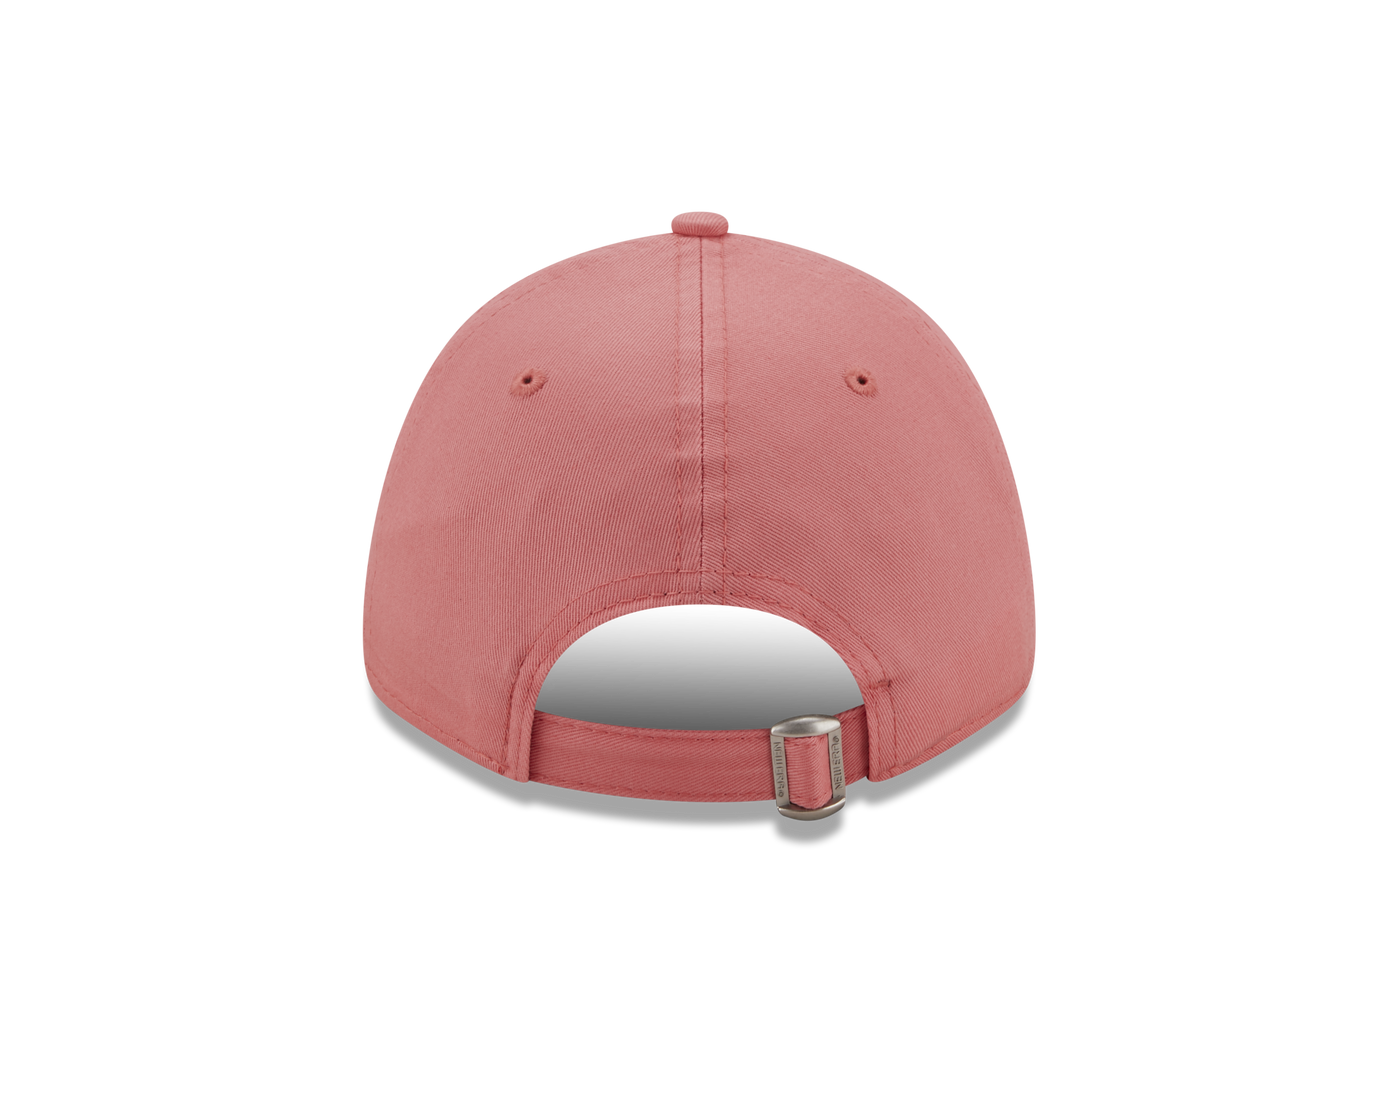 NEW YORK YANKEES LEAGUE ESSENTIAL 9FORTY PINK 9FORTY CAP